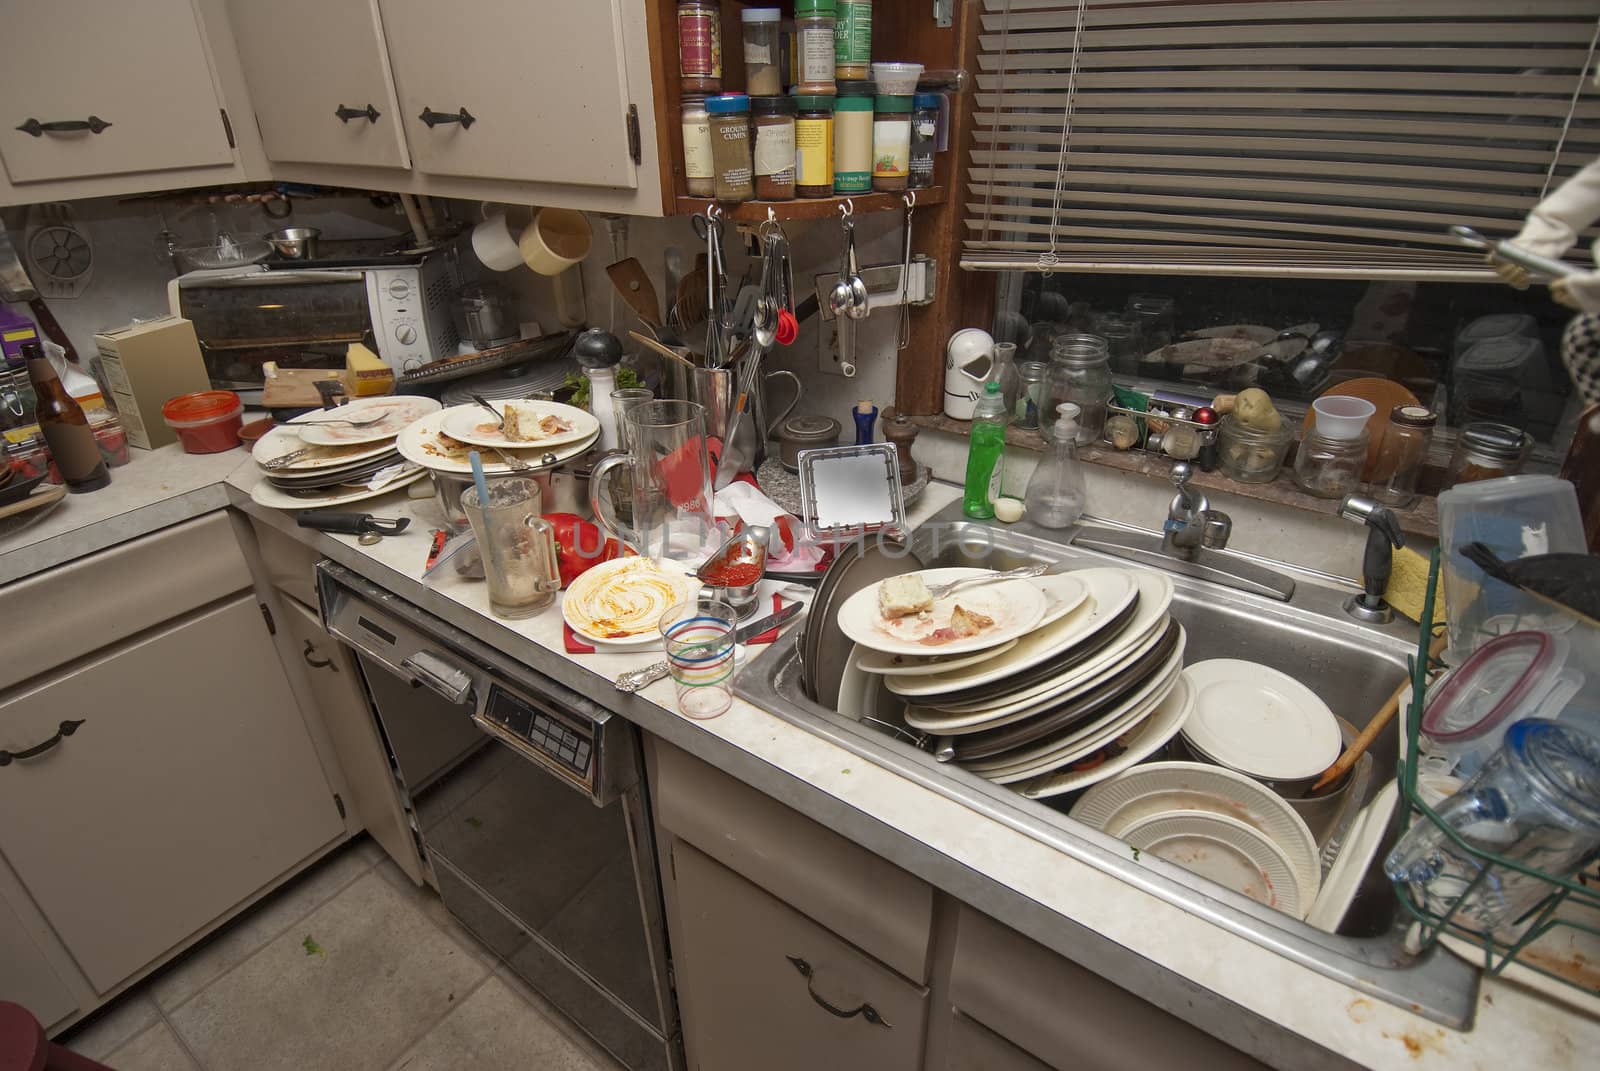 Dirty dishes in sink after a party